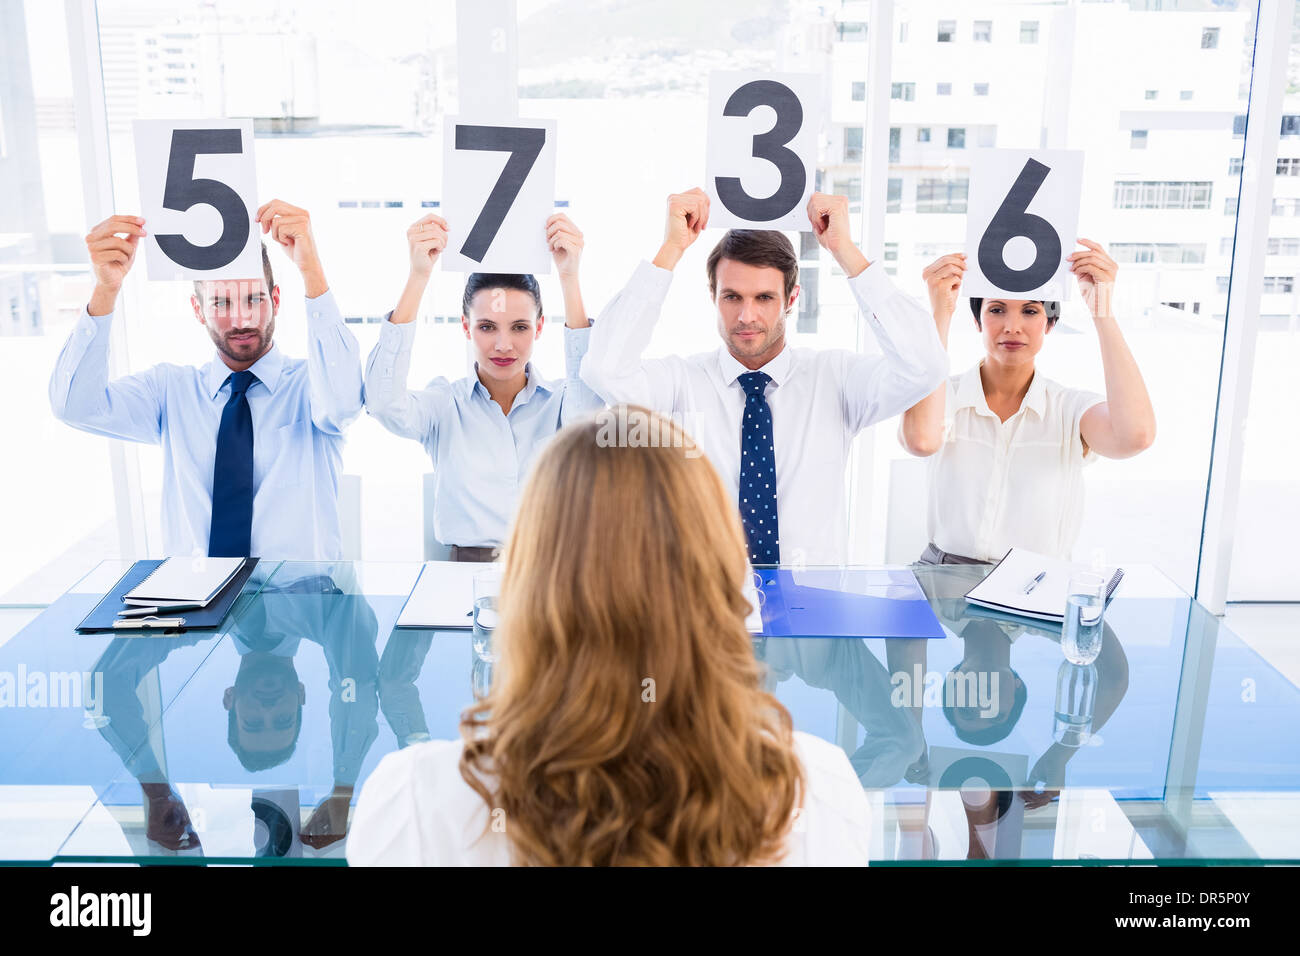 Group of panel judges holding score signs in front of a woman Stock Photo